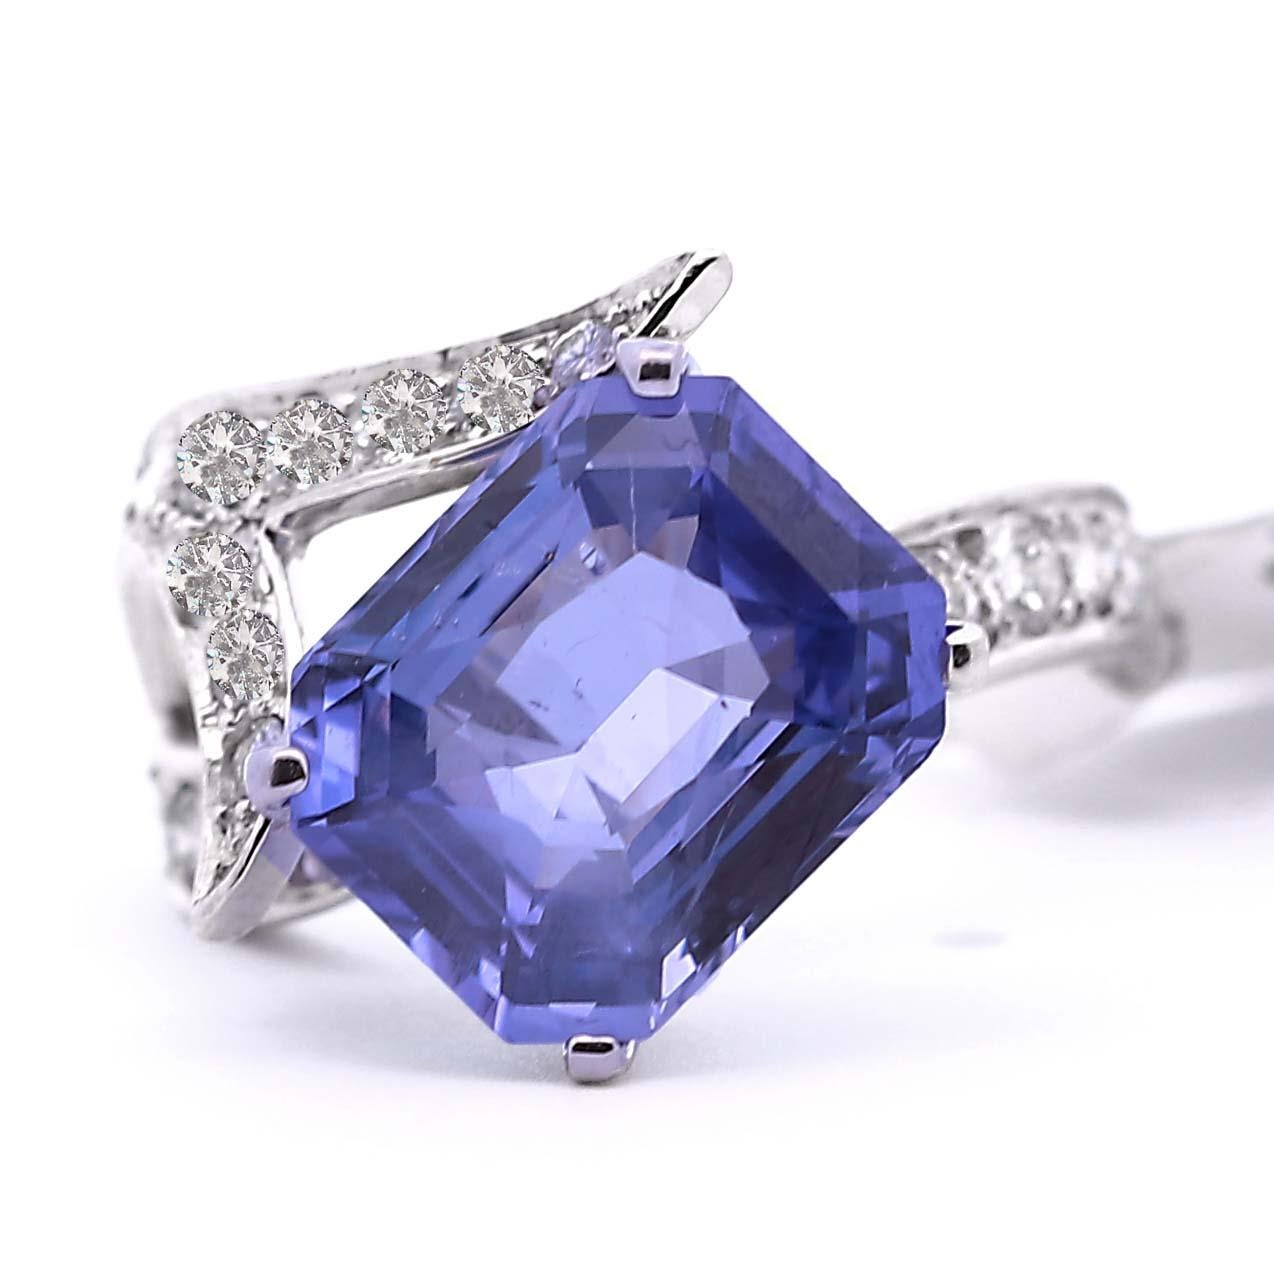 Unique GIA-certified 6.19 ct. No Heat Color Change Sapphire Cocktail Ring. This extraordinary contemporary piece features a bright Violetish Blue sapphire that transcends to Purple. The white gold setting, adorned with diamonds, enhances the stone's